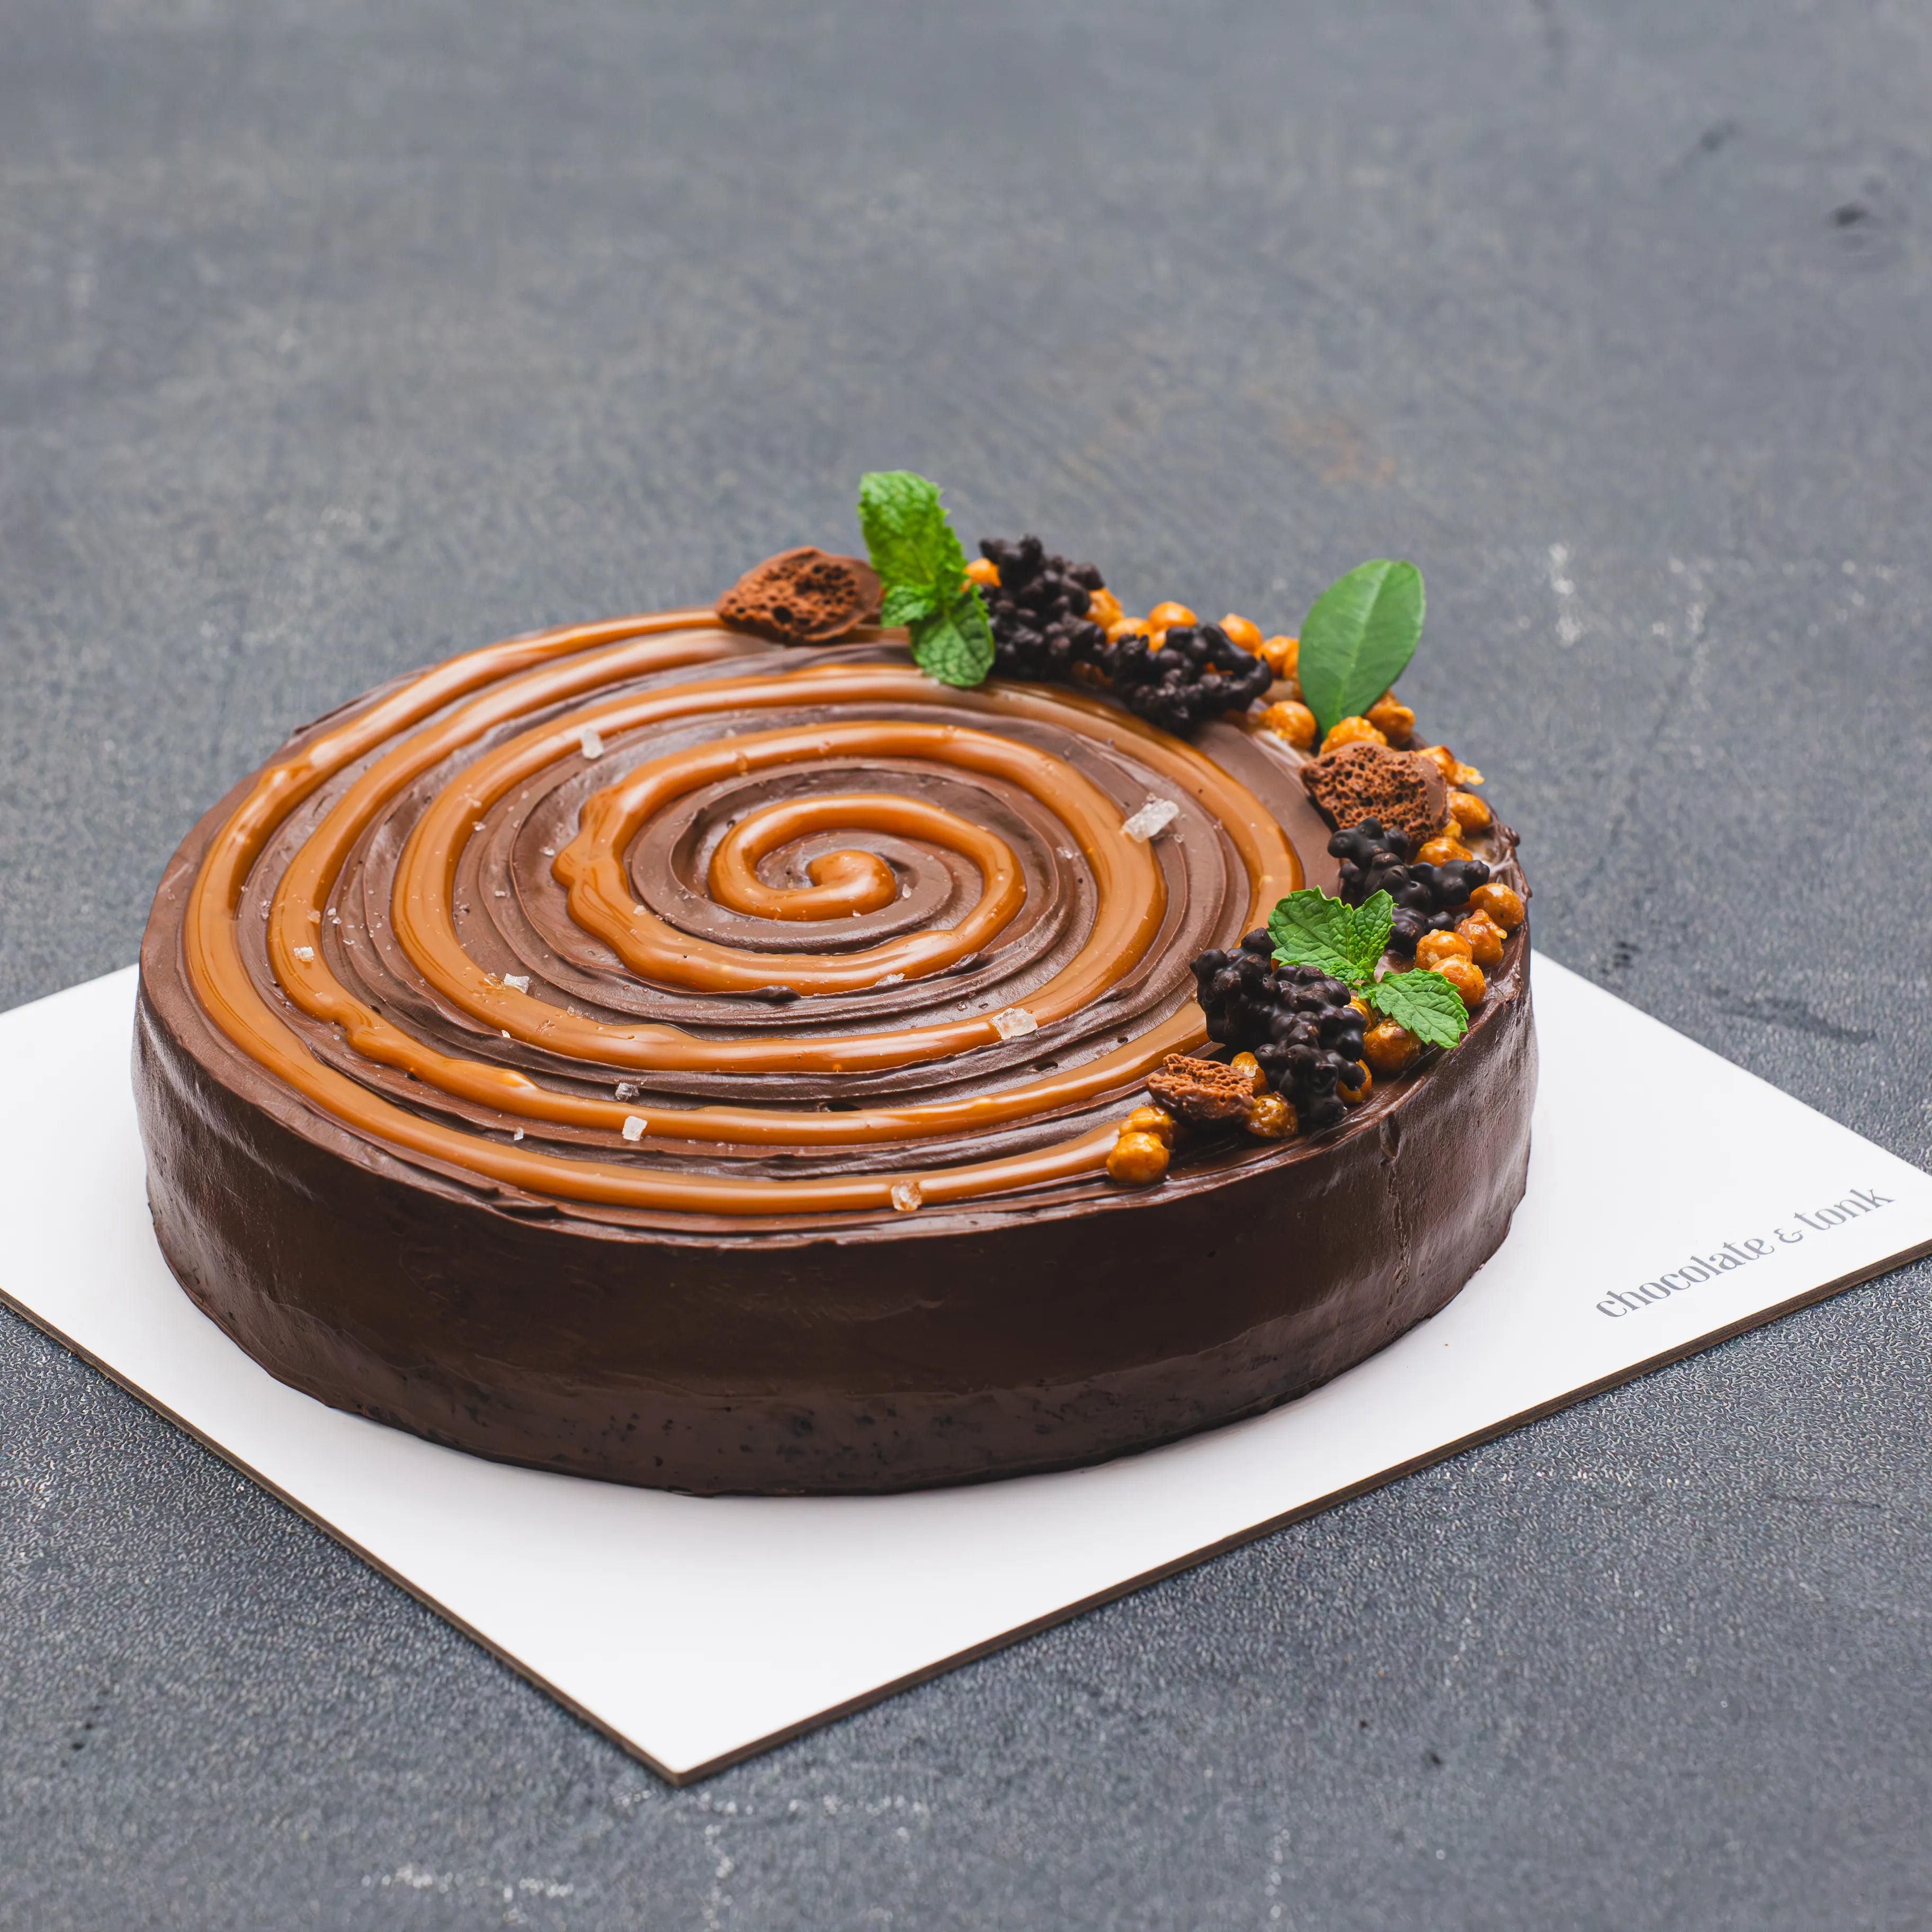 Decadent chocolate cake with salted caramel